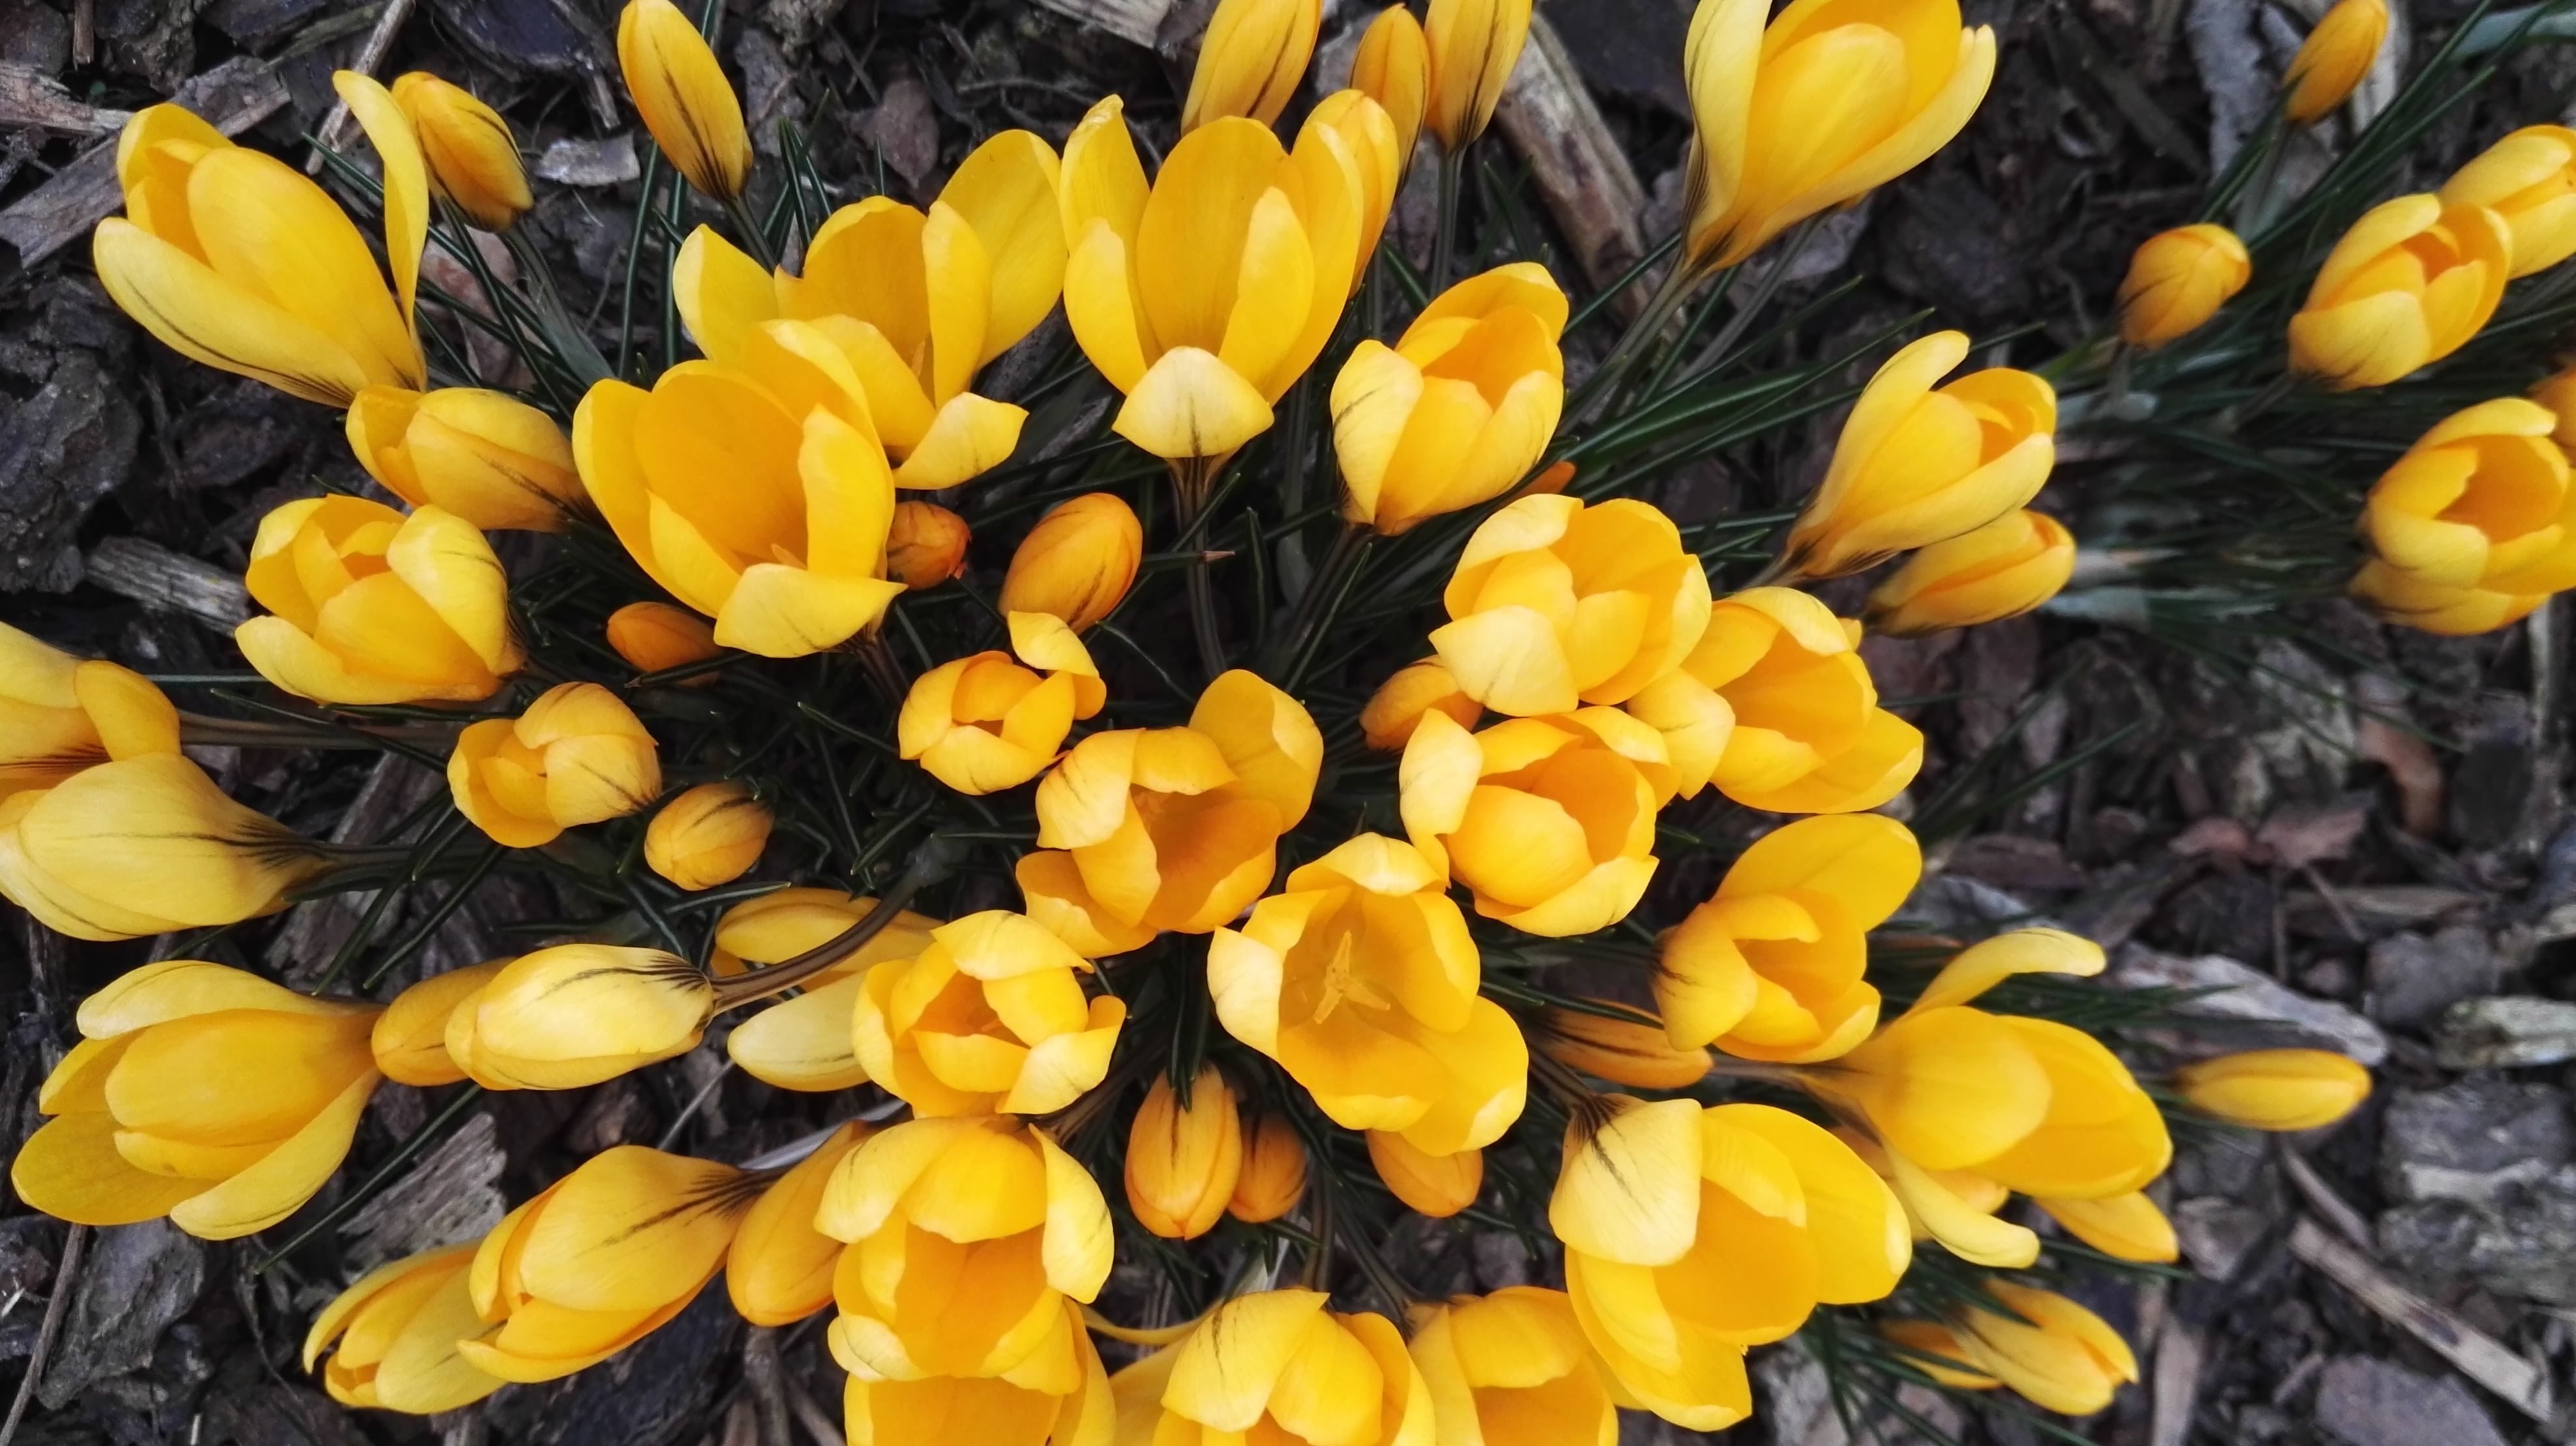 Free picture: tulips, yellow, flowers, beautiful, bloom, blooming ...